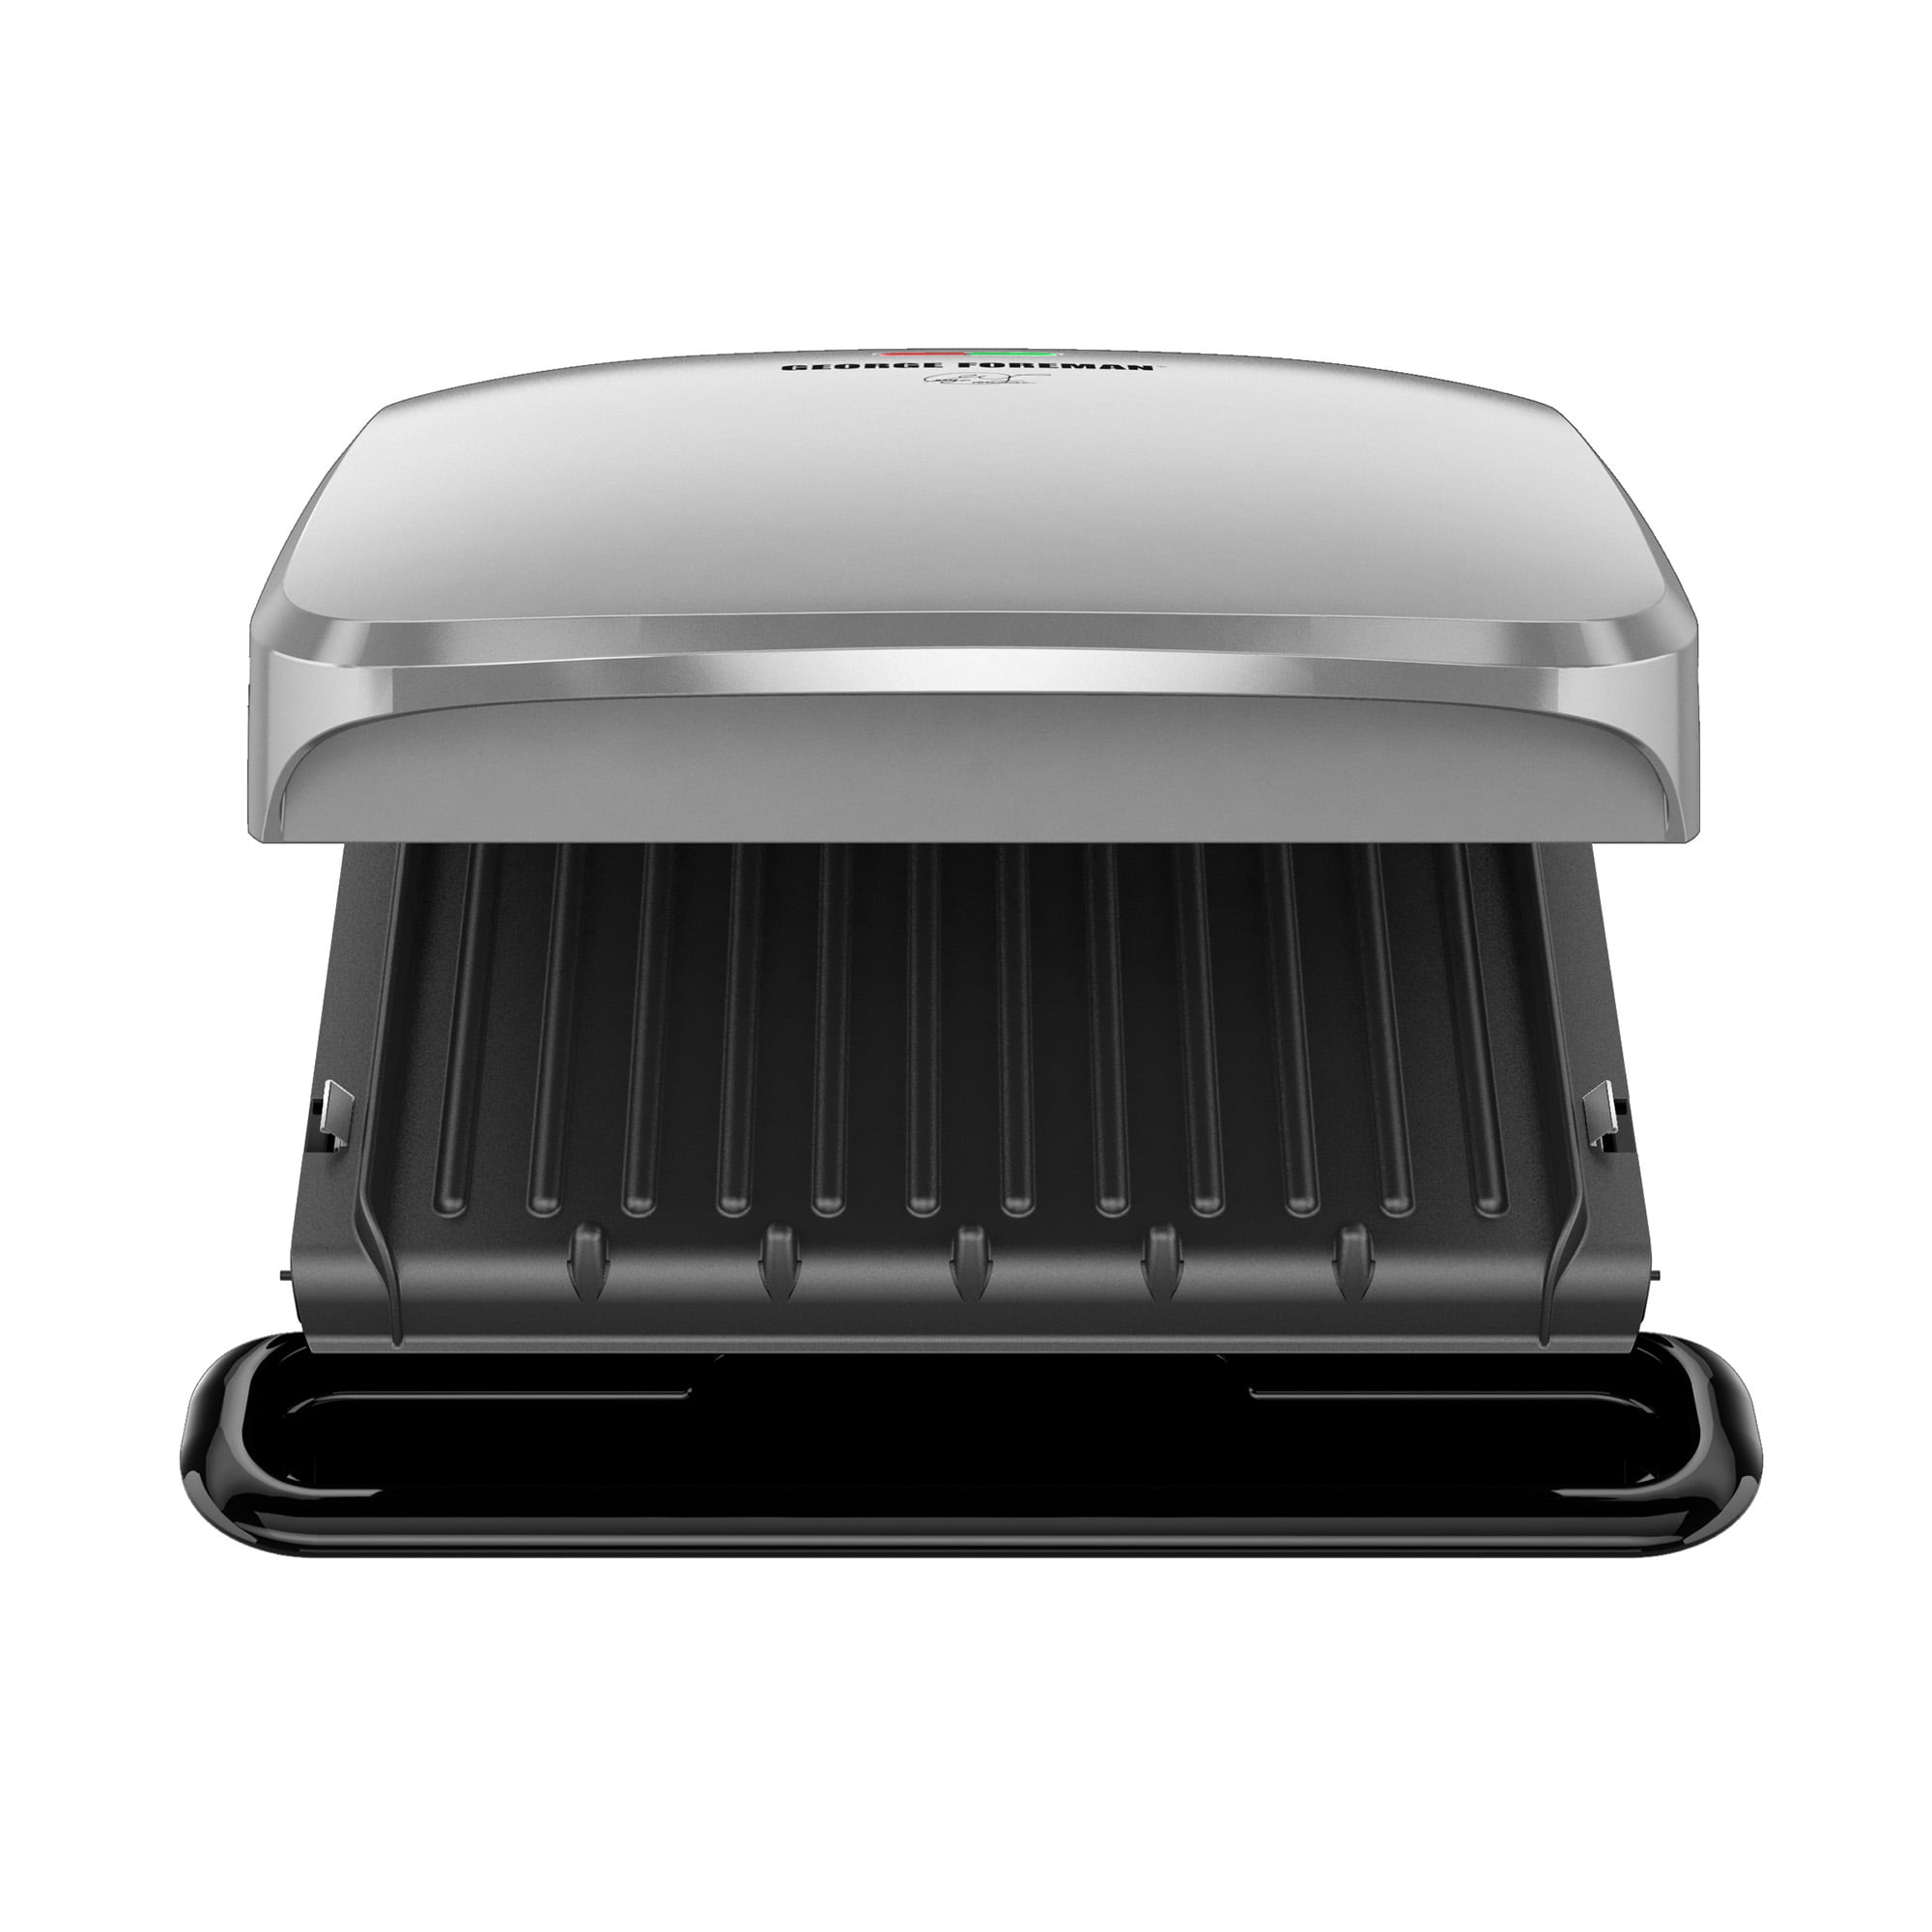 Large George Foreman Grill BBQ - REMOVABLE Plates - appliances - by owner -  sale - craigslist